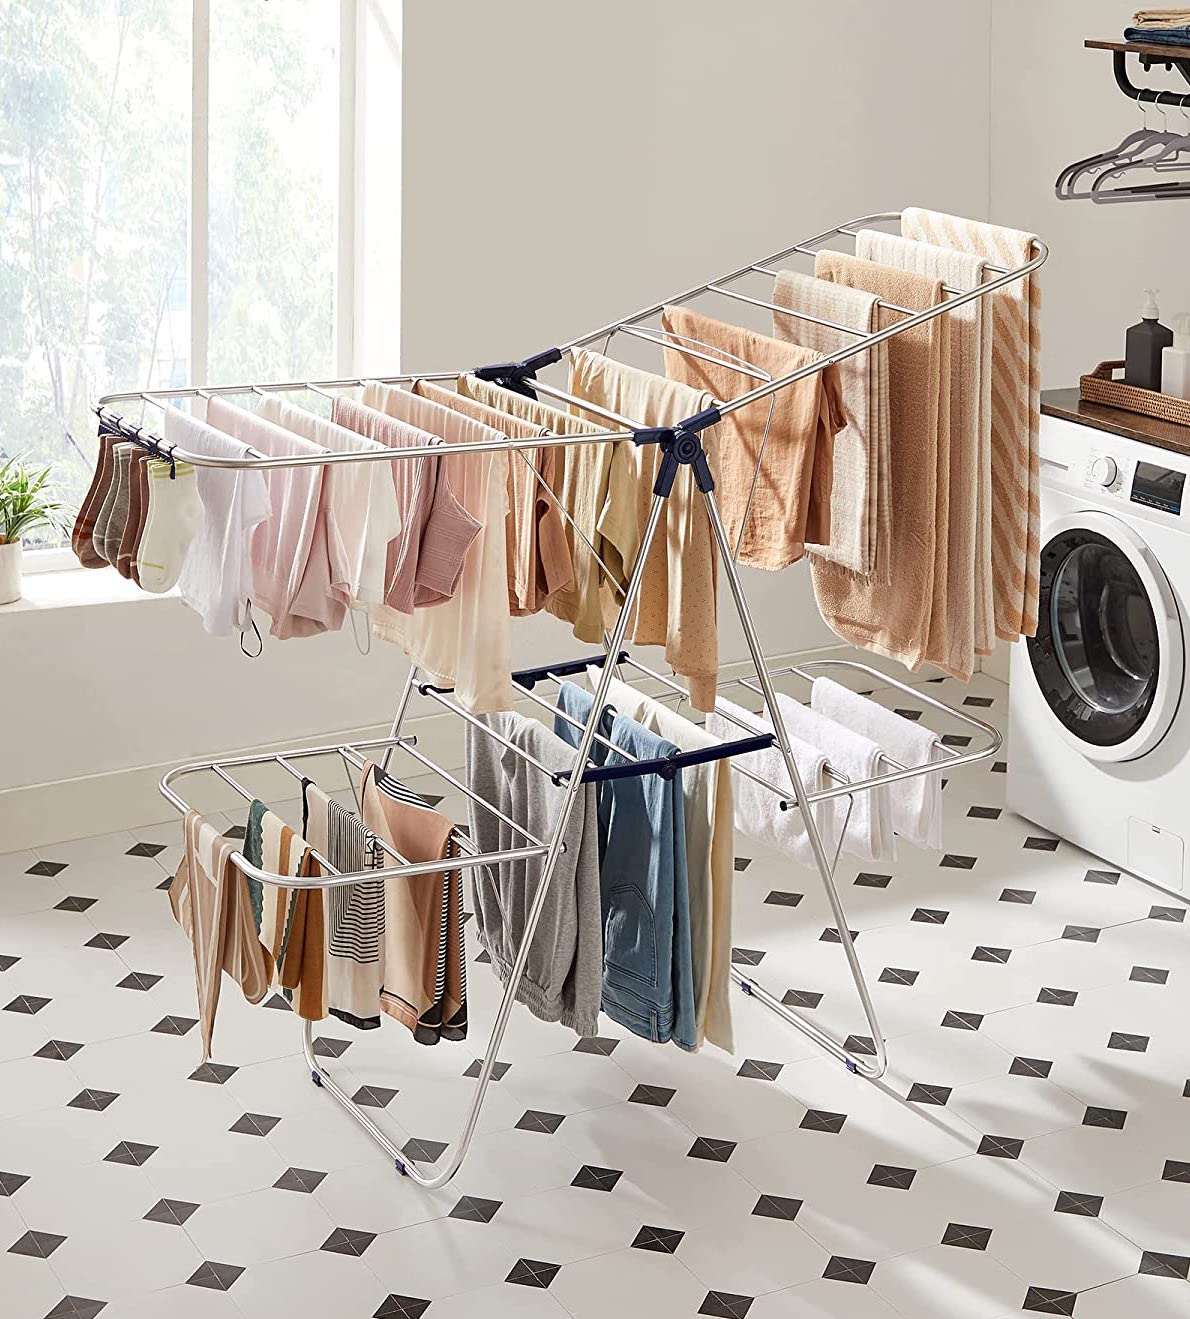 large drying rack on which several warm colored t shirts are hanging in a laundry room with black and white tiled floor